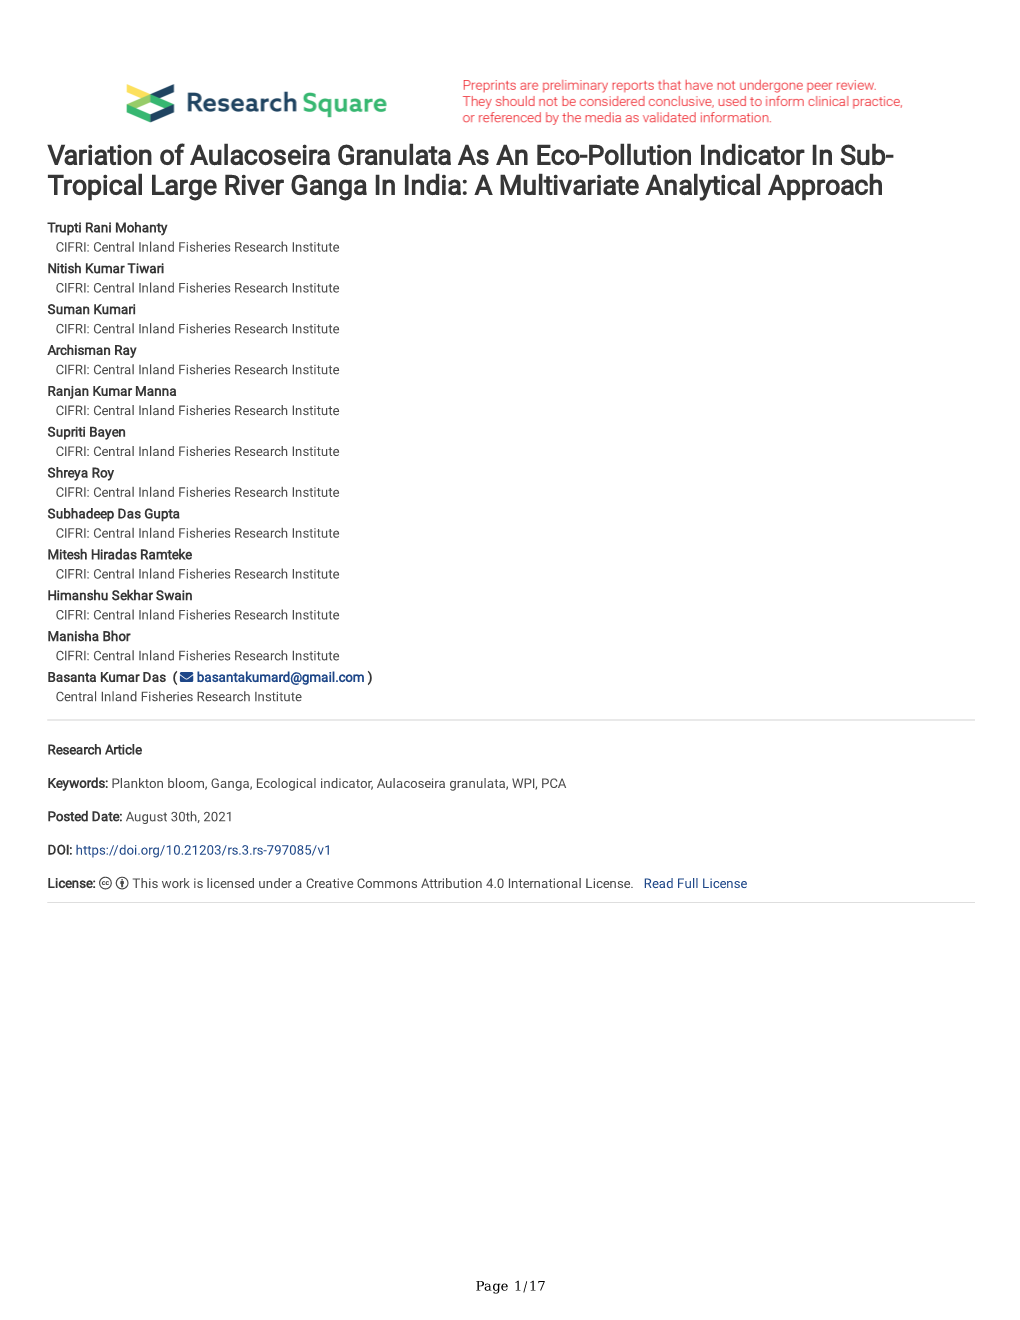 Variation of Aulacoseira Granulata As an Eco-Pollution Indicator in Sub- Tropical Large River Ganga in India: a Multivariate Analytical Approach